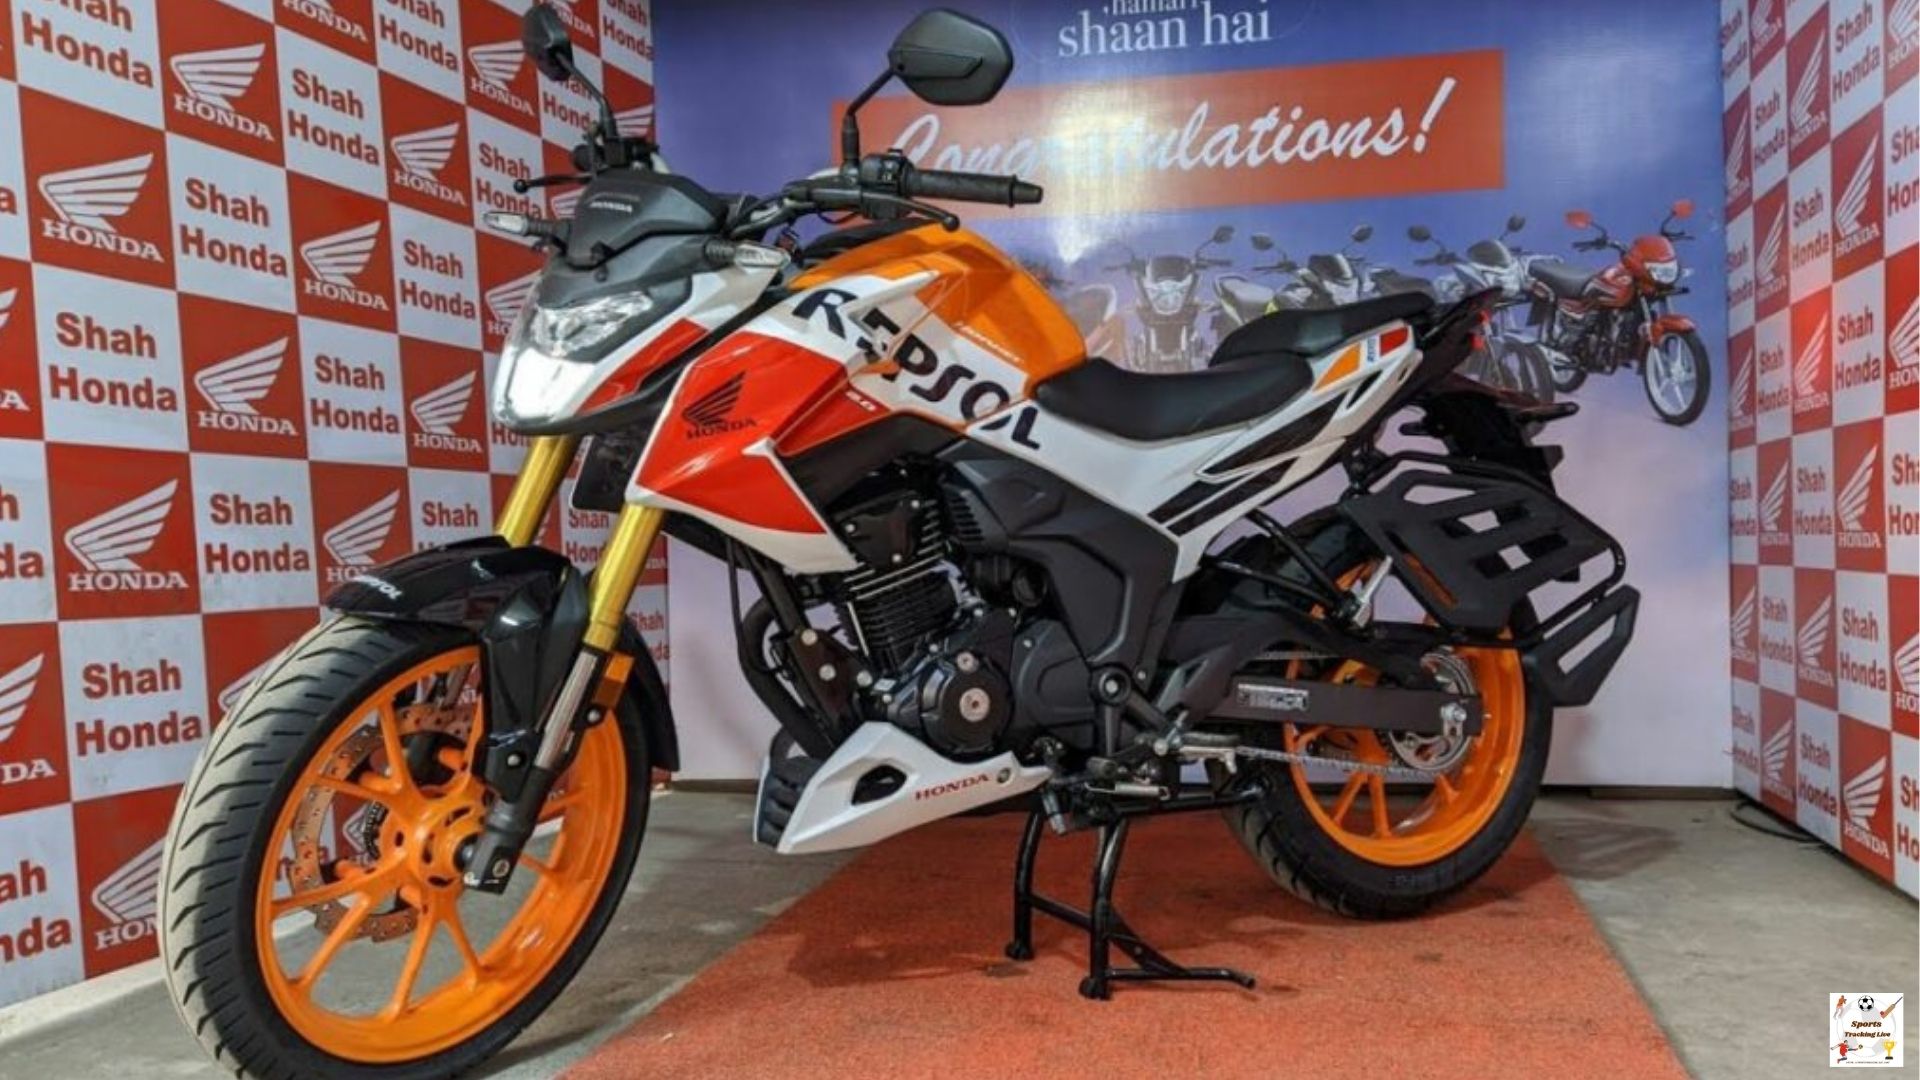 Extreme Honda Hornet 2.0 is coming this Navratri. Know how much they cost